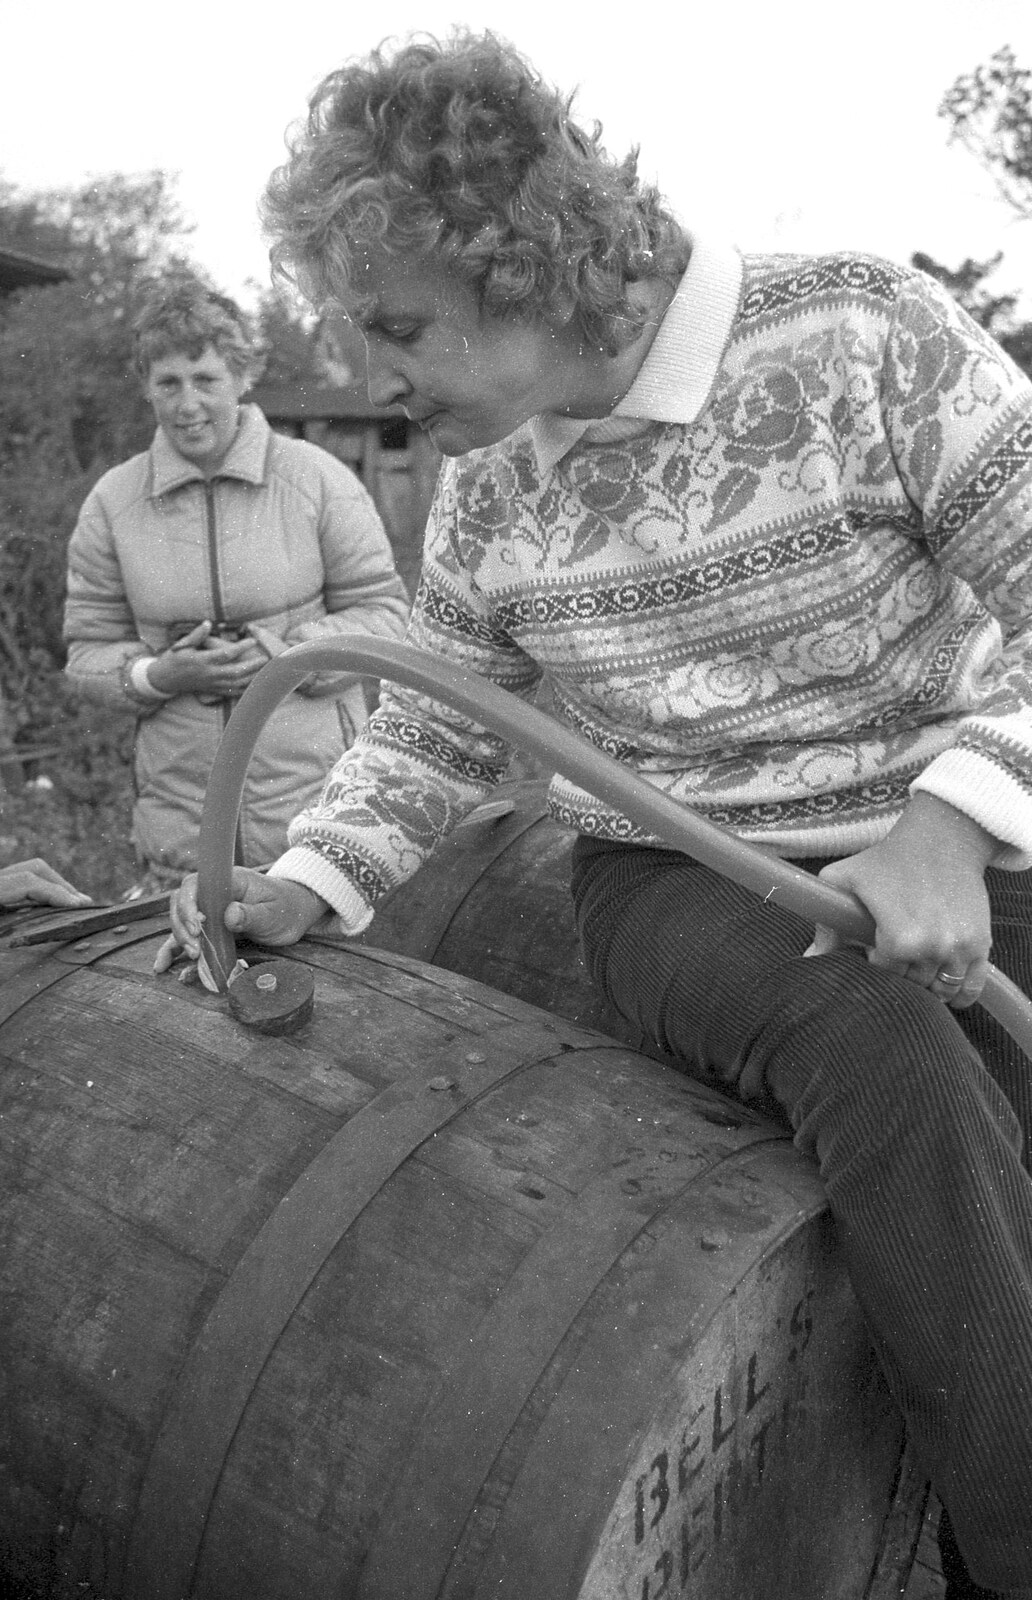 Linda feeds apple juice into a barrel from Cider Making in Black and White, Stuston, Suffolk - 11th October 1992